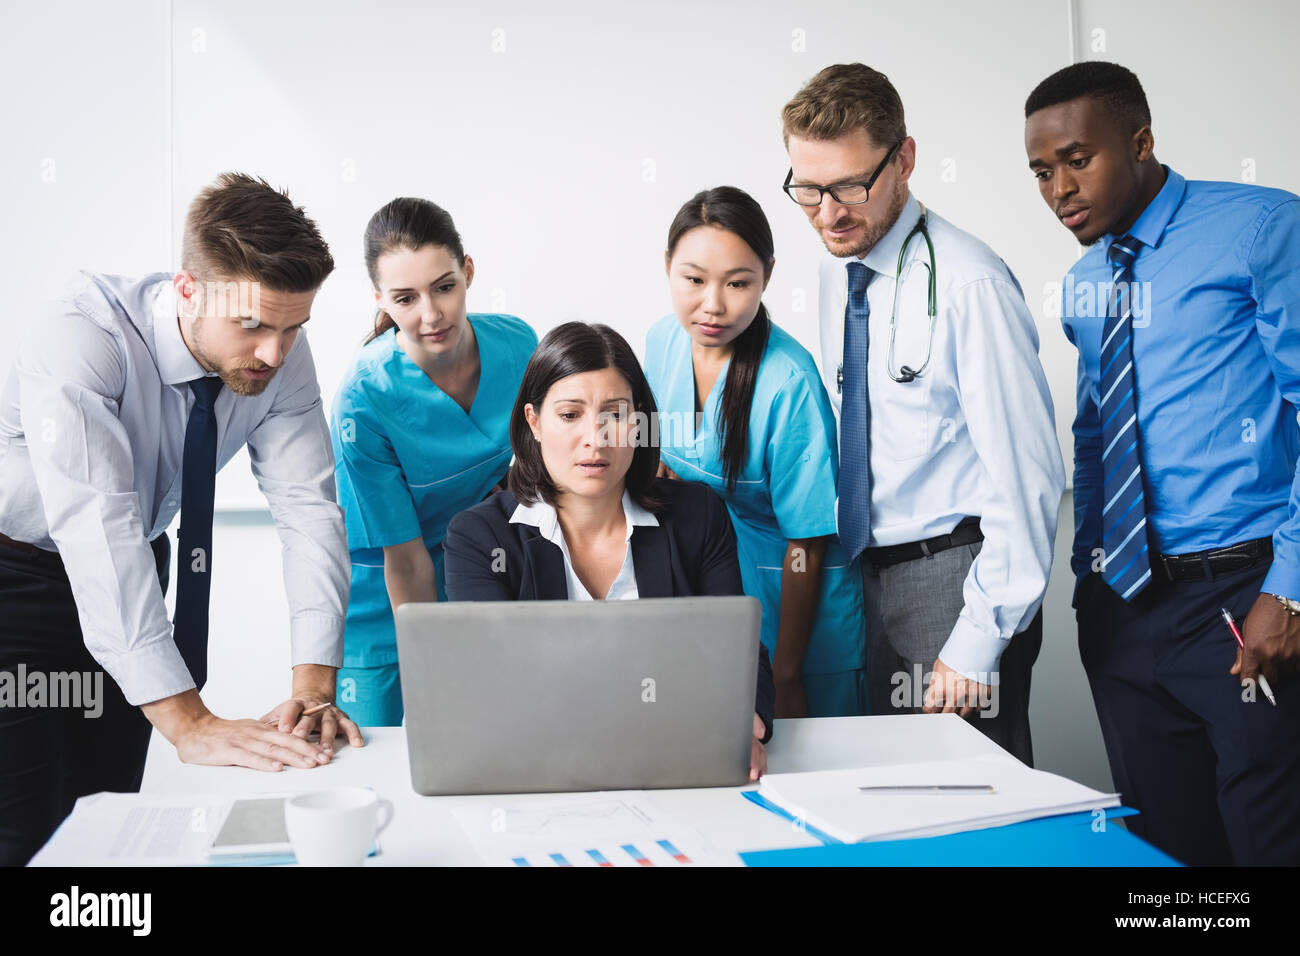 Team of doctor discussing over laptop in meeting Stock Photo